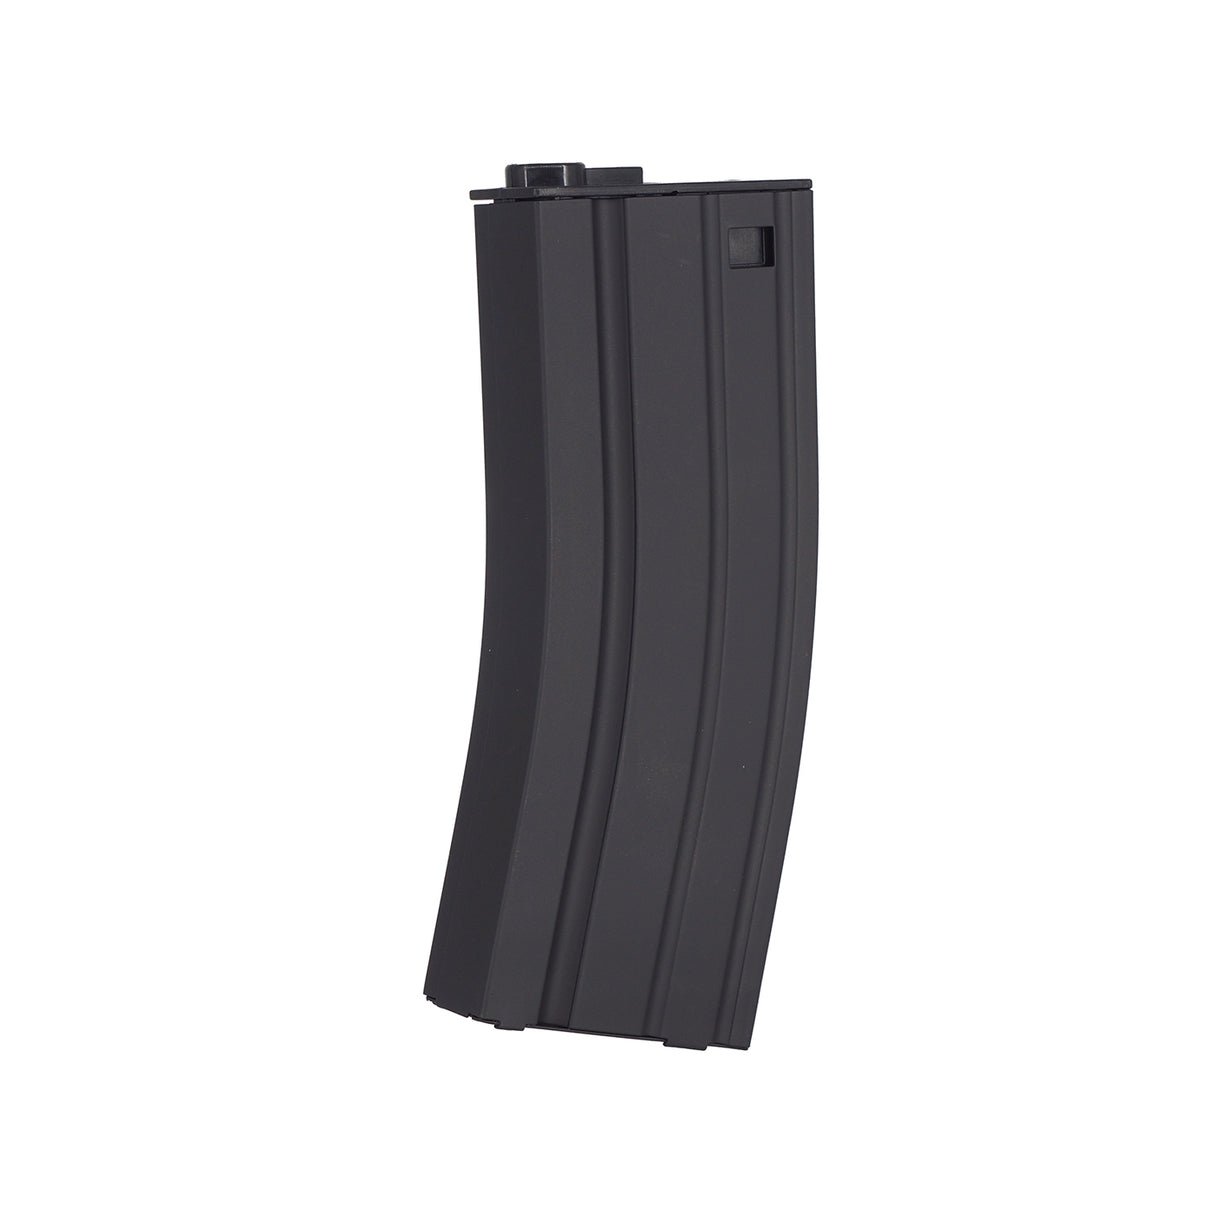 18 Airsoft M4 190 Rounds Magazine for AR / M4 AEG 5pcs Pack